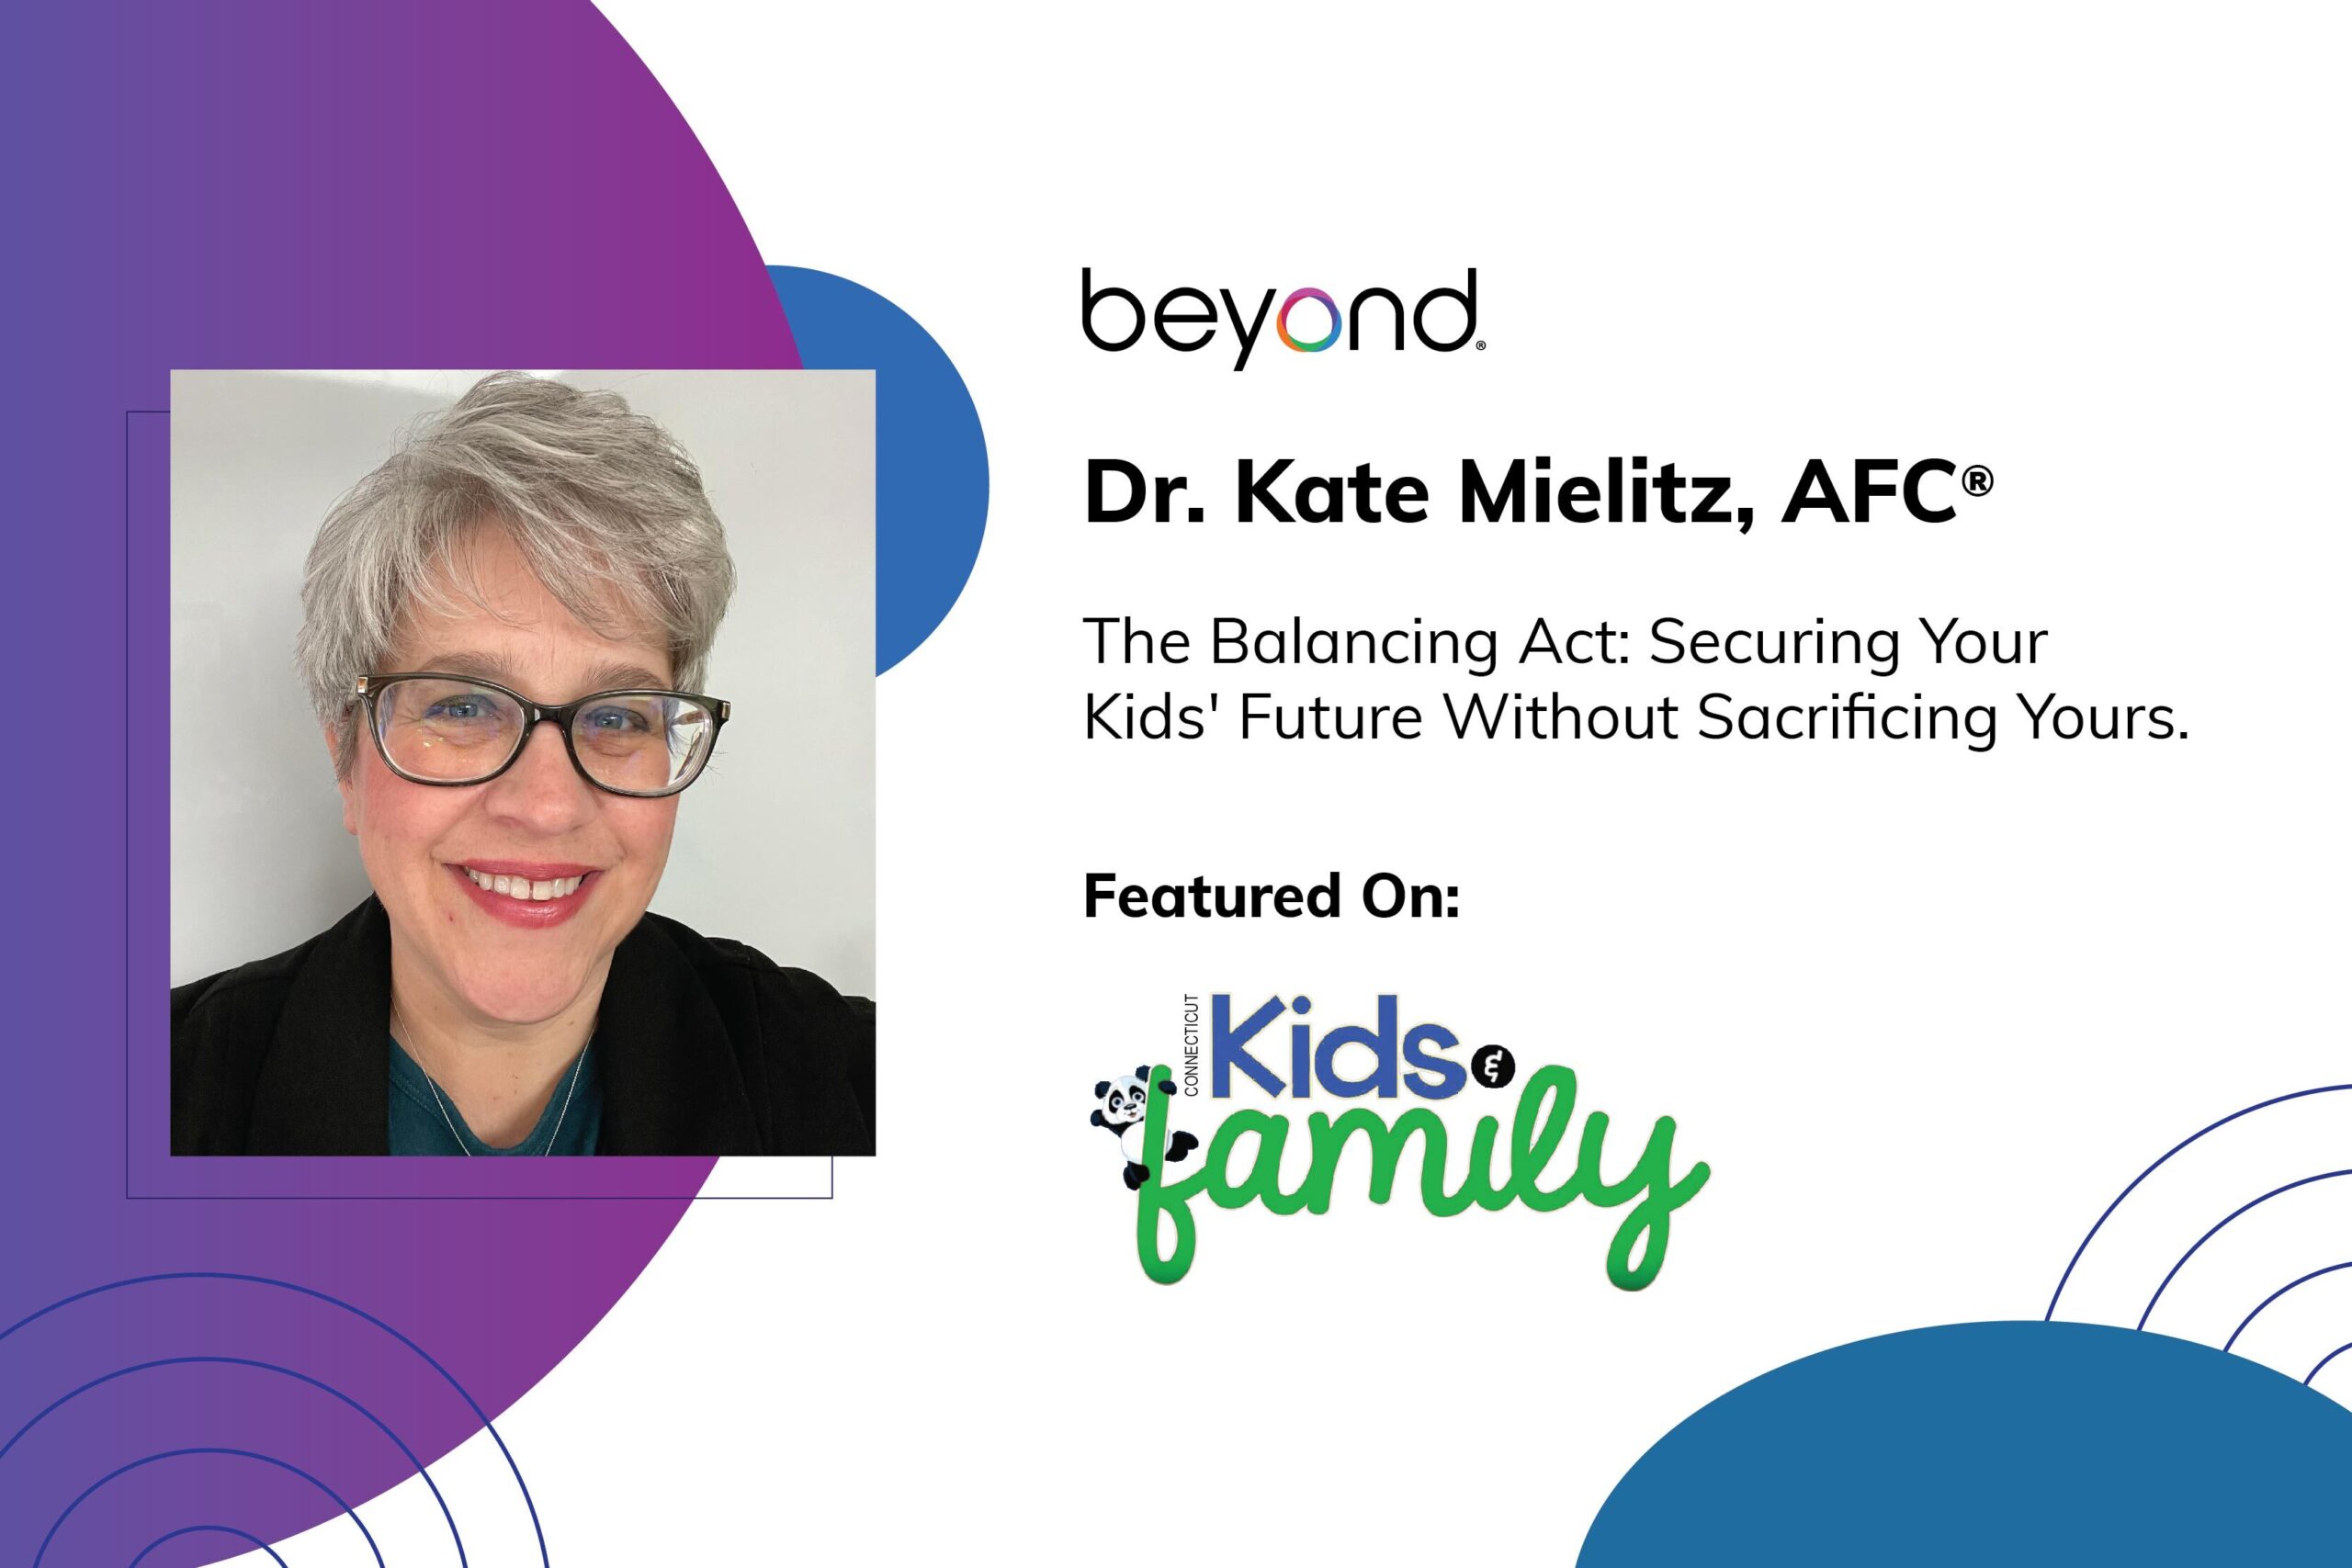 Beyond Finance's Dr. Kate Mielitz discusses retirement and college